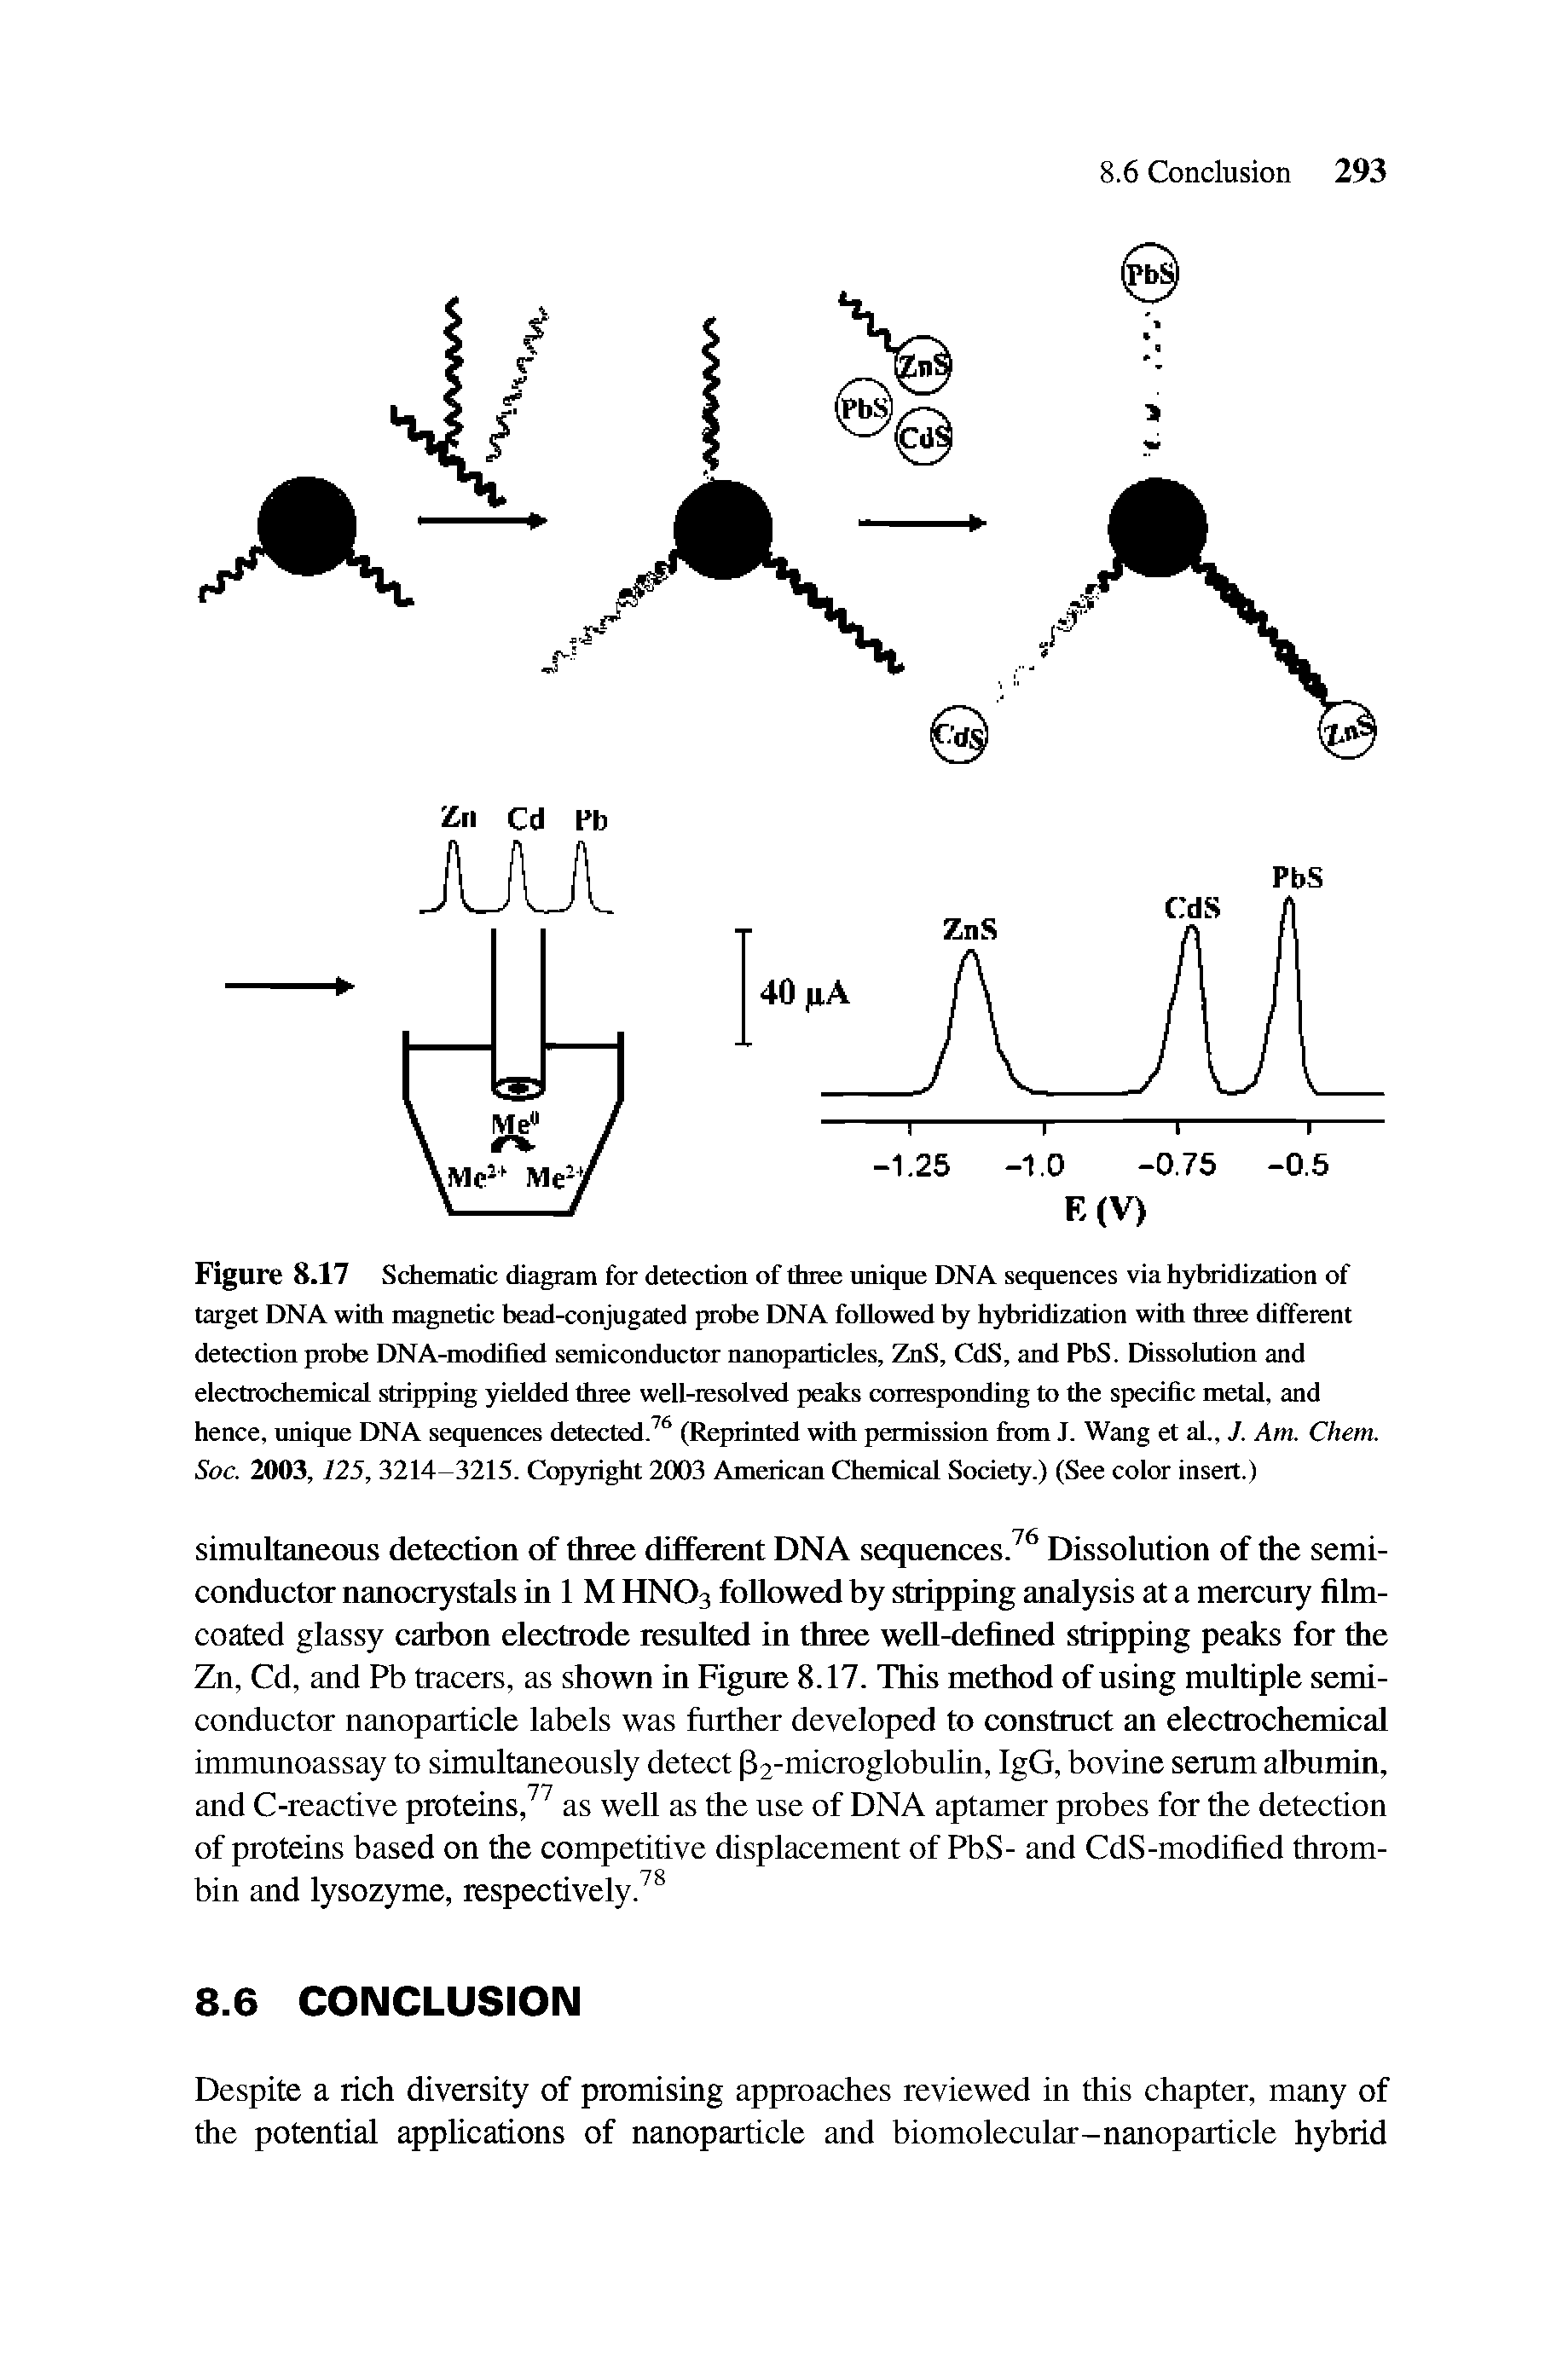 Figure 8.17 Schematic diagram for detection of three unique DNA sequences via hybridization of target DNA with magnetic bead-conjugated probe DNA followed by hybridization with three different detection probe DNA-modified semiconductor nanopaiticles, ZnS, CdS, and PbS. Dissolution and electrochemical stripping yielded three well-resolved peaks corresponding to the specific metal, and hence, unique DNA sequences detected.76 (Reprinted with permission from J. Wang et aL, J. Am. Chem. Soc. 2003,125, 3214-3215. Copyright 2003 American Chemical Society.) (See color insert.)...